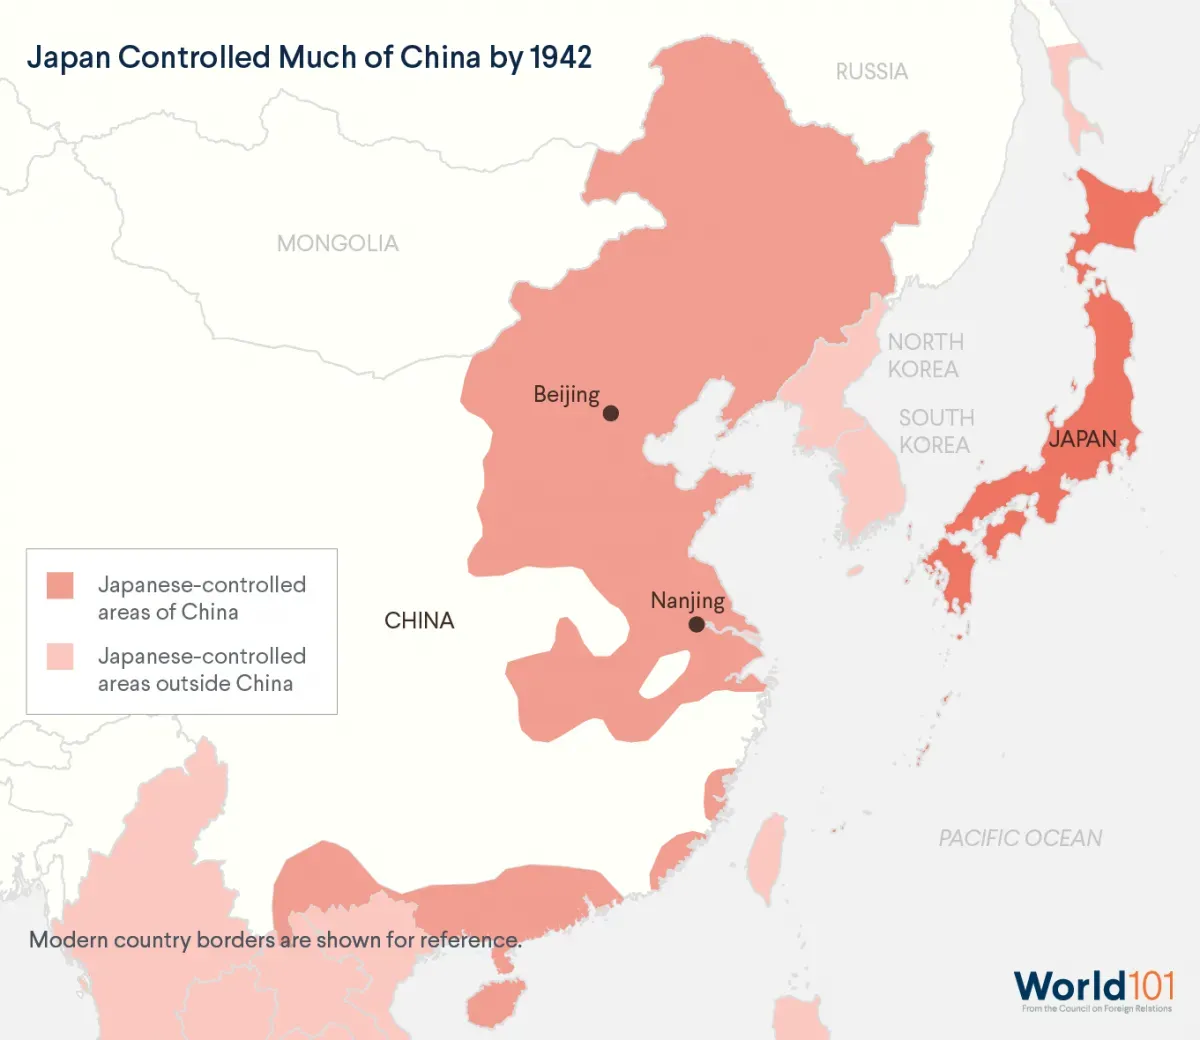 Map showing how Japan controlled much of China, particularly the northeast, by 1942.